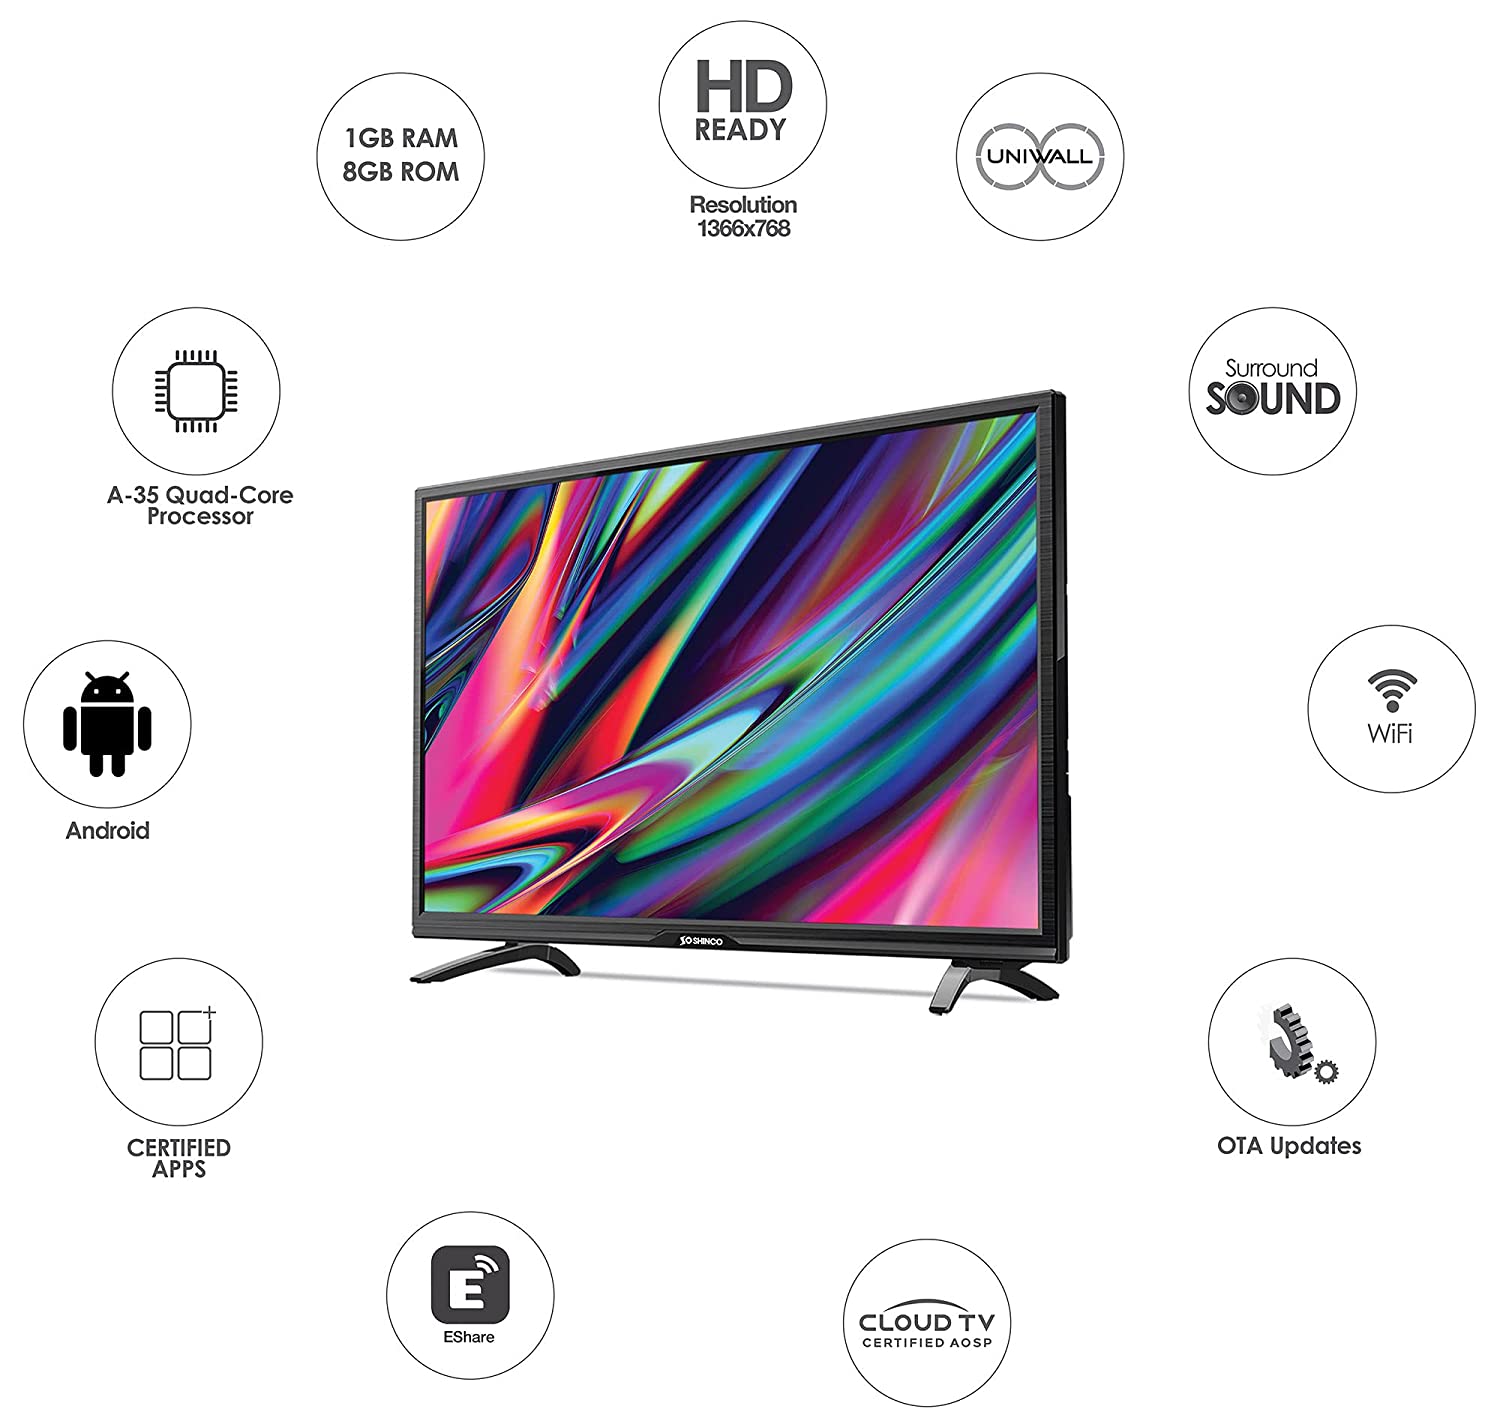 Amazon Festival Sale: Cheapest offer on 32-inch Smart TV for today, buy less than Rs.10 thousand